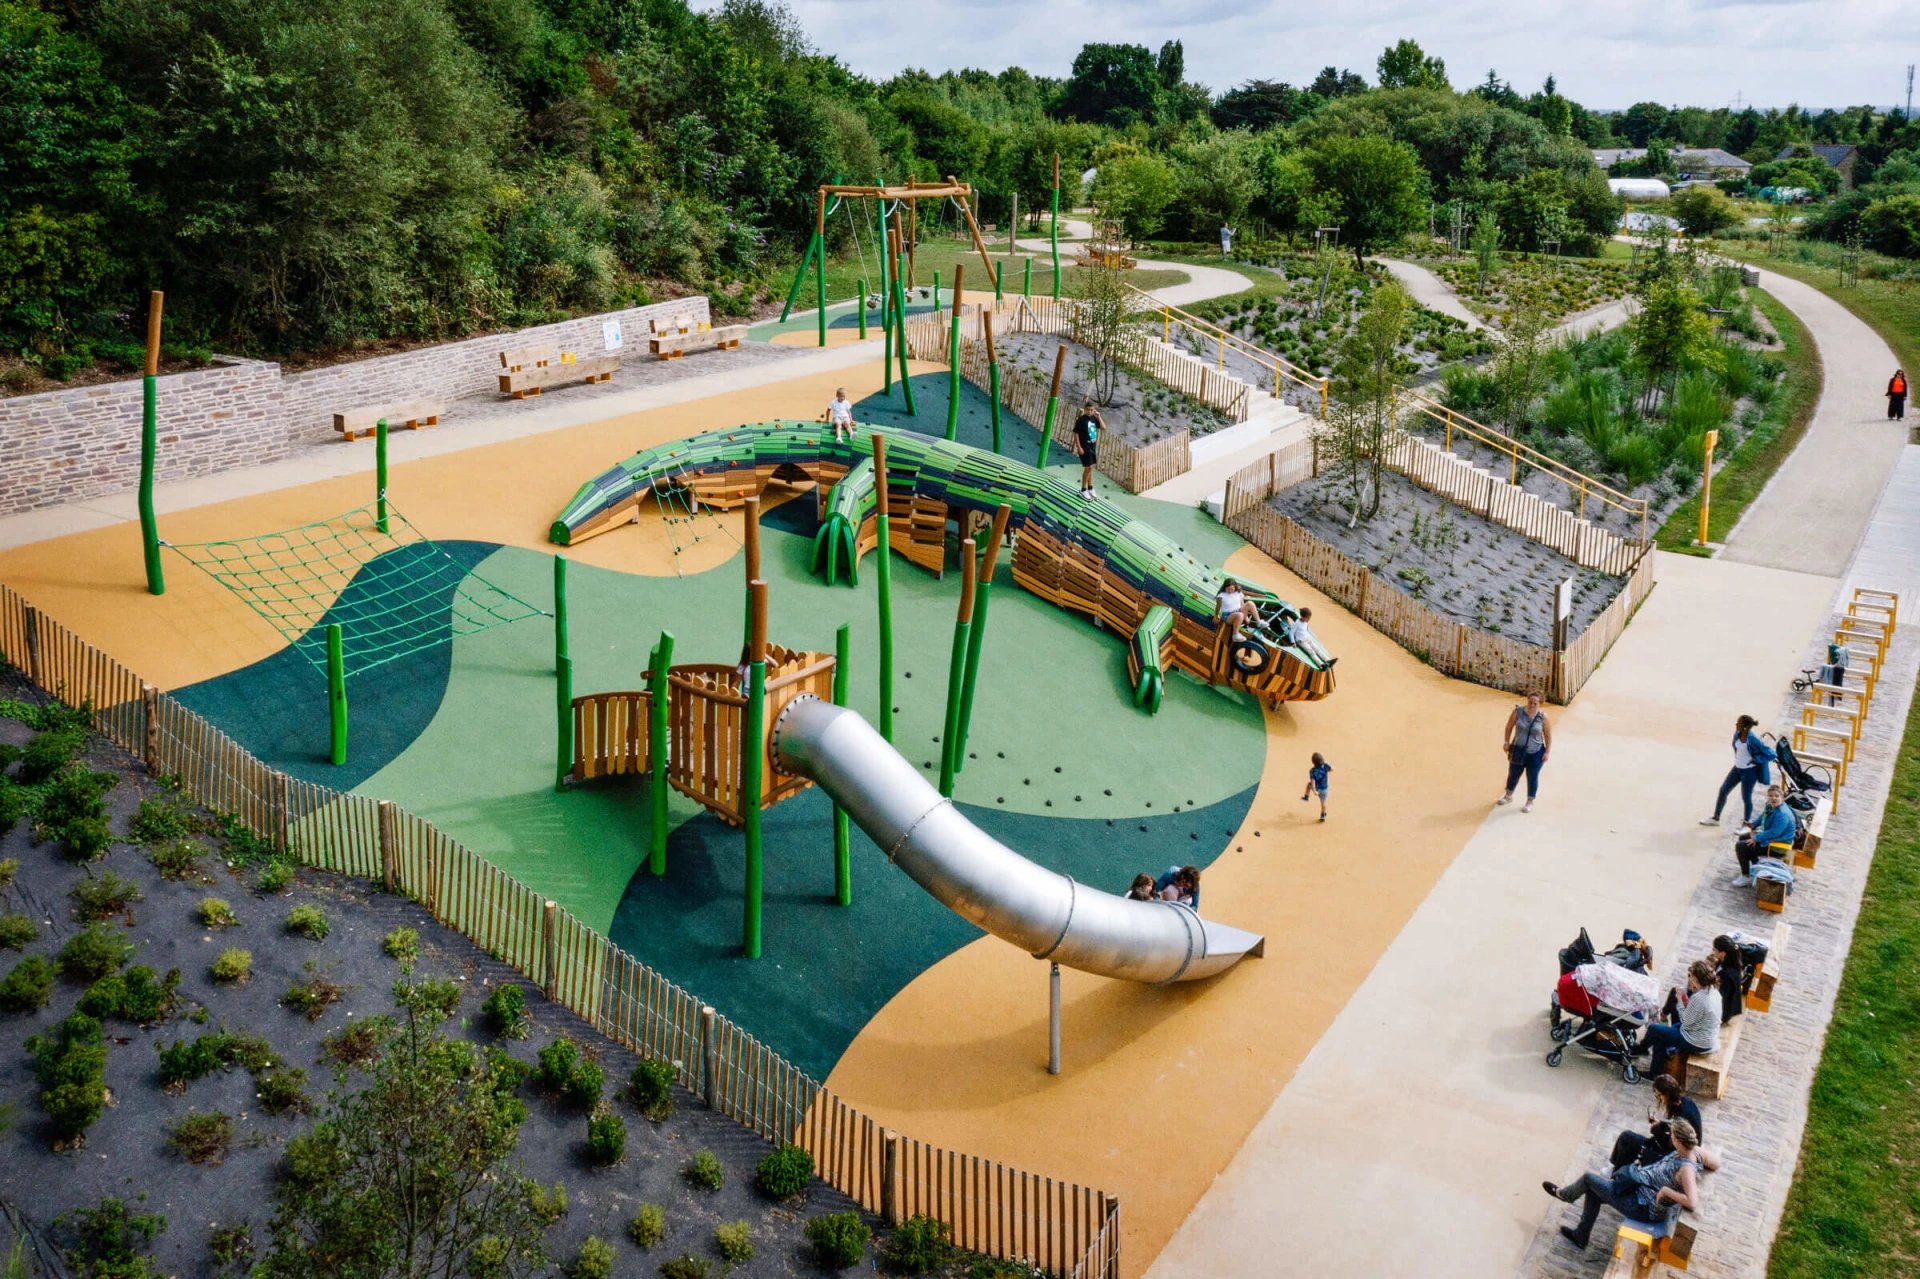 custom playground equipment in a park in France